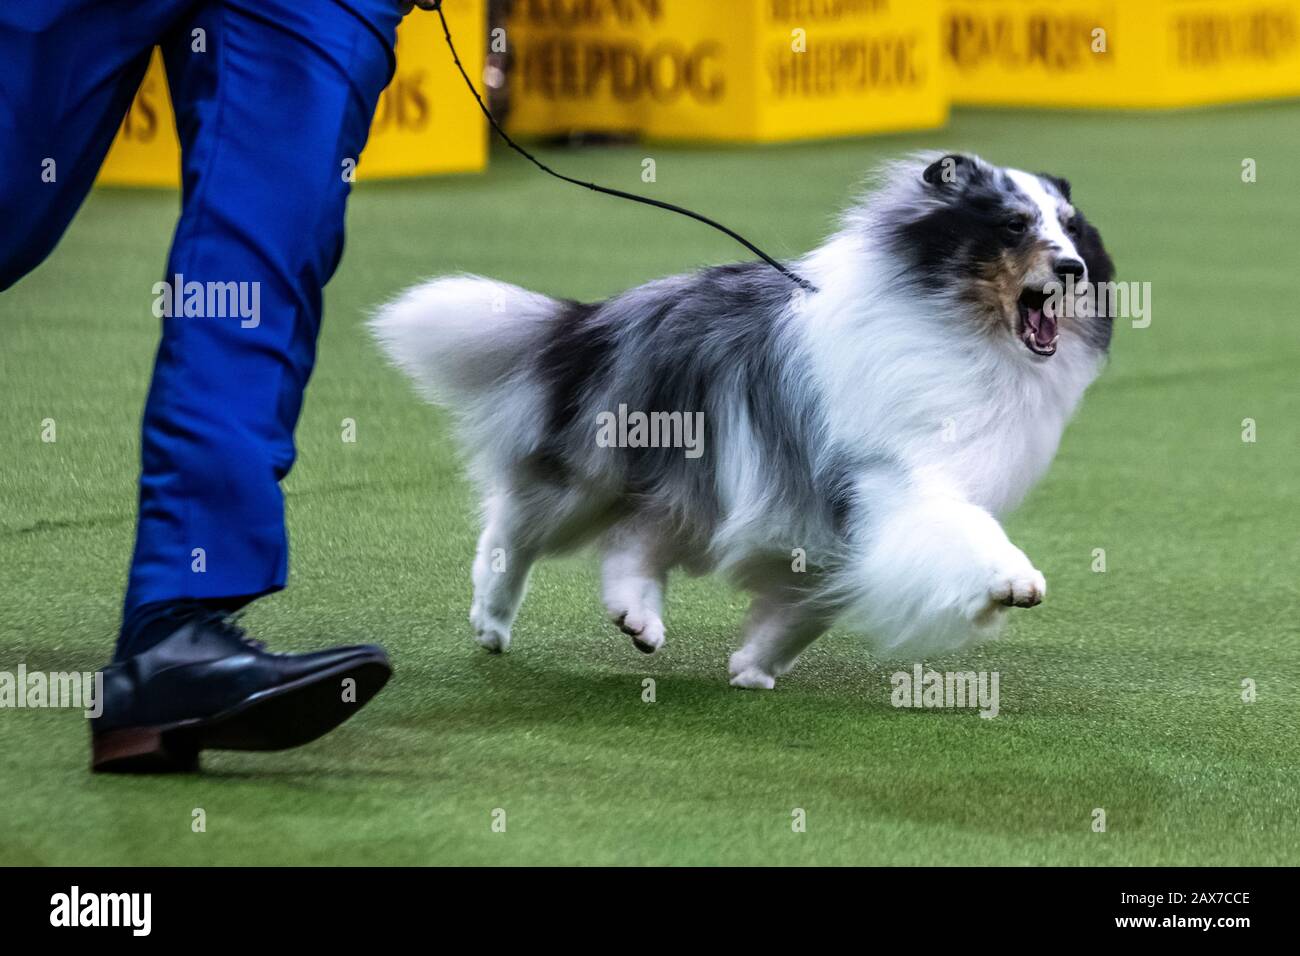 New York, USA. 10th Feb, 2020. Conrad the Shetland sheepdog competes to win the Herding group category at the 144th Westminster Kennel Club Dog show in New York city's Madison Square Garden. Conrad's formal competition name is Syringa-Akadia The Corsair.  Credit: Enrique Shore/Alamy Live News Stock Photo